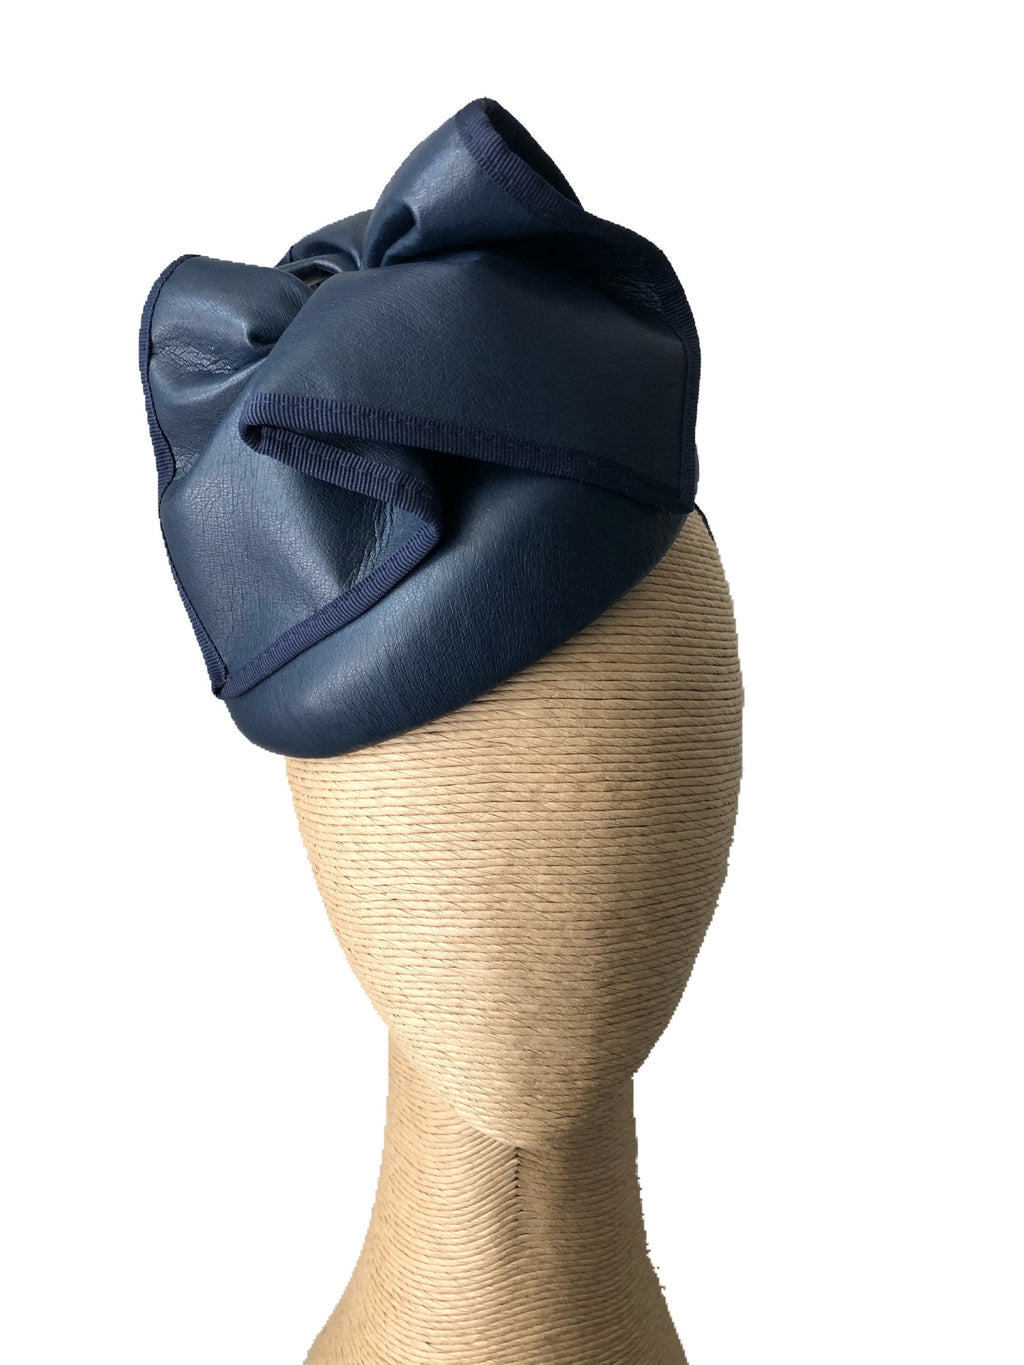 Max Alexander Florence Leather Hat in Navy